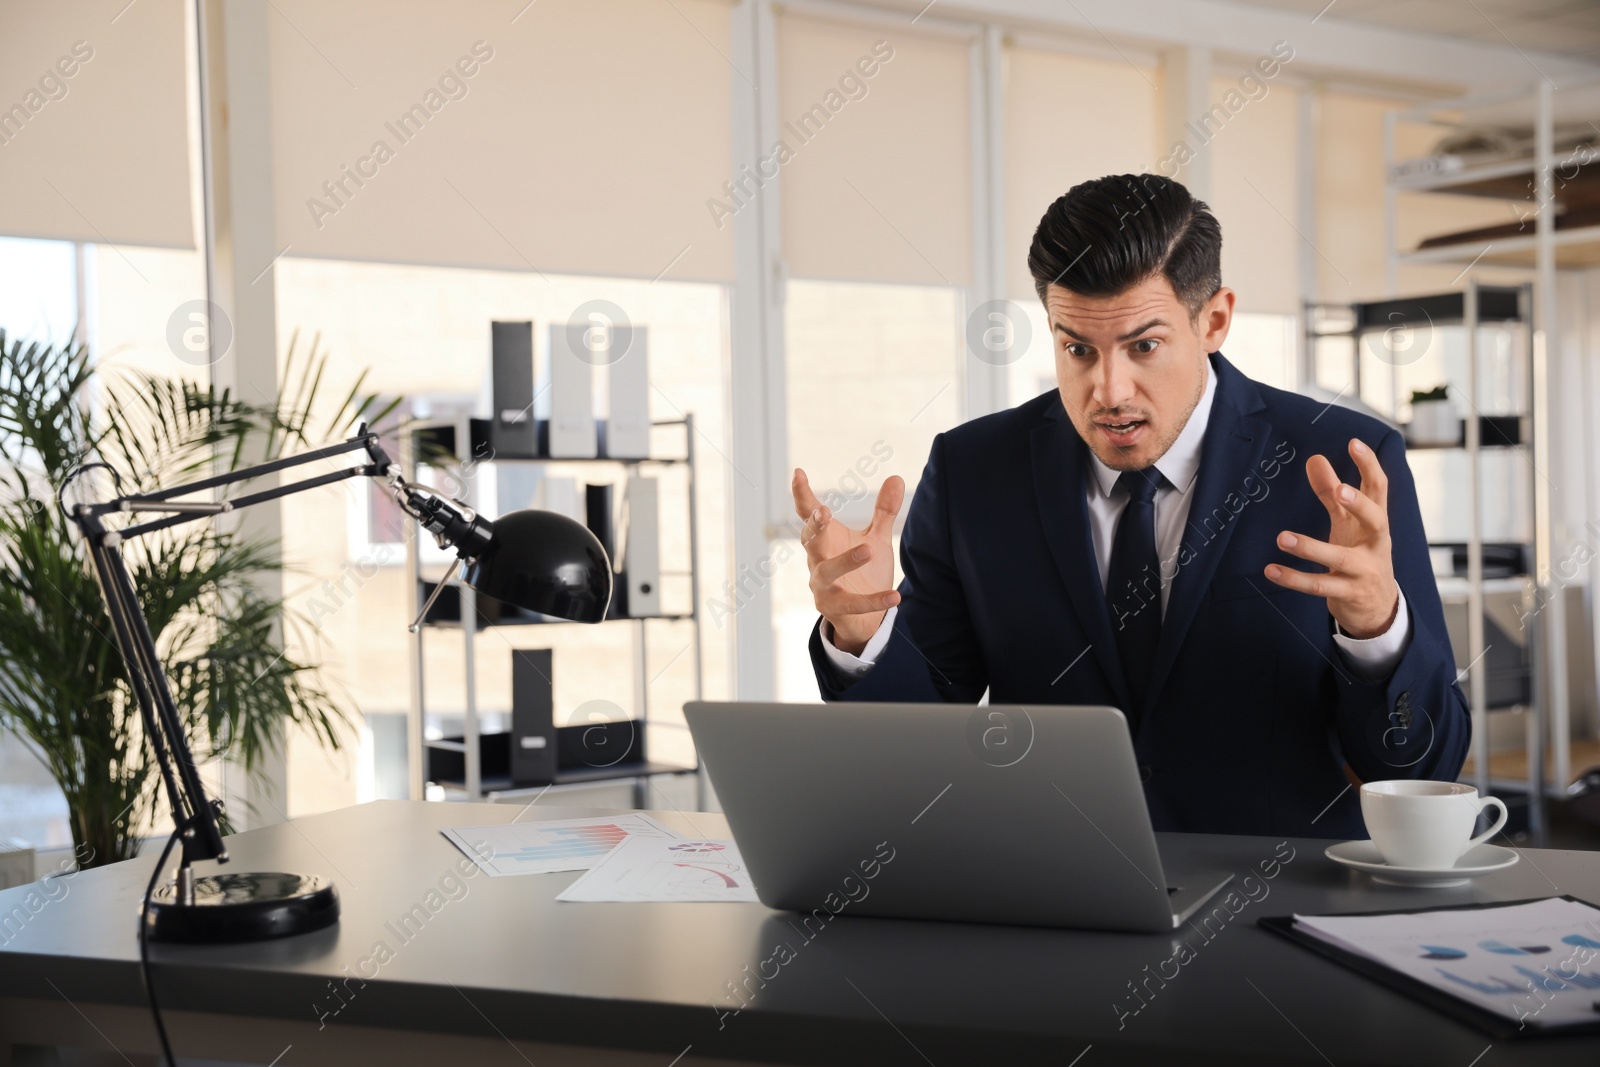 Photo of Emotional businessman with laptop at table in office